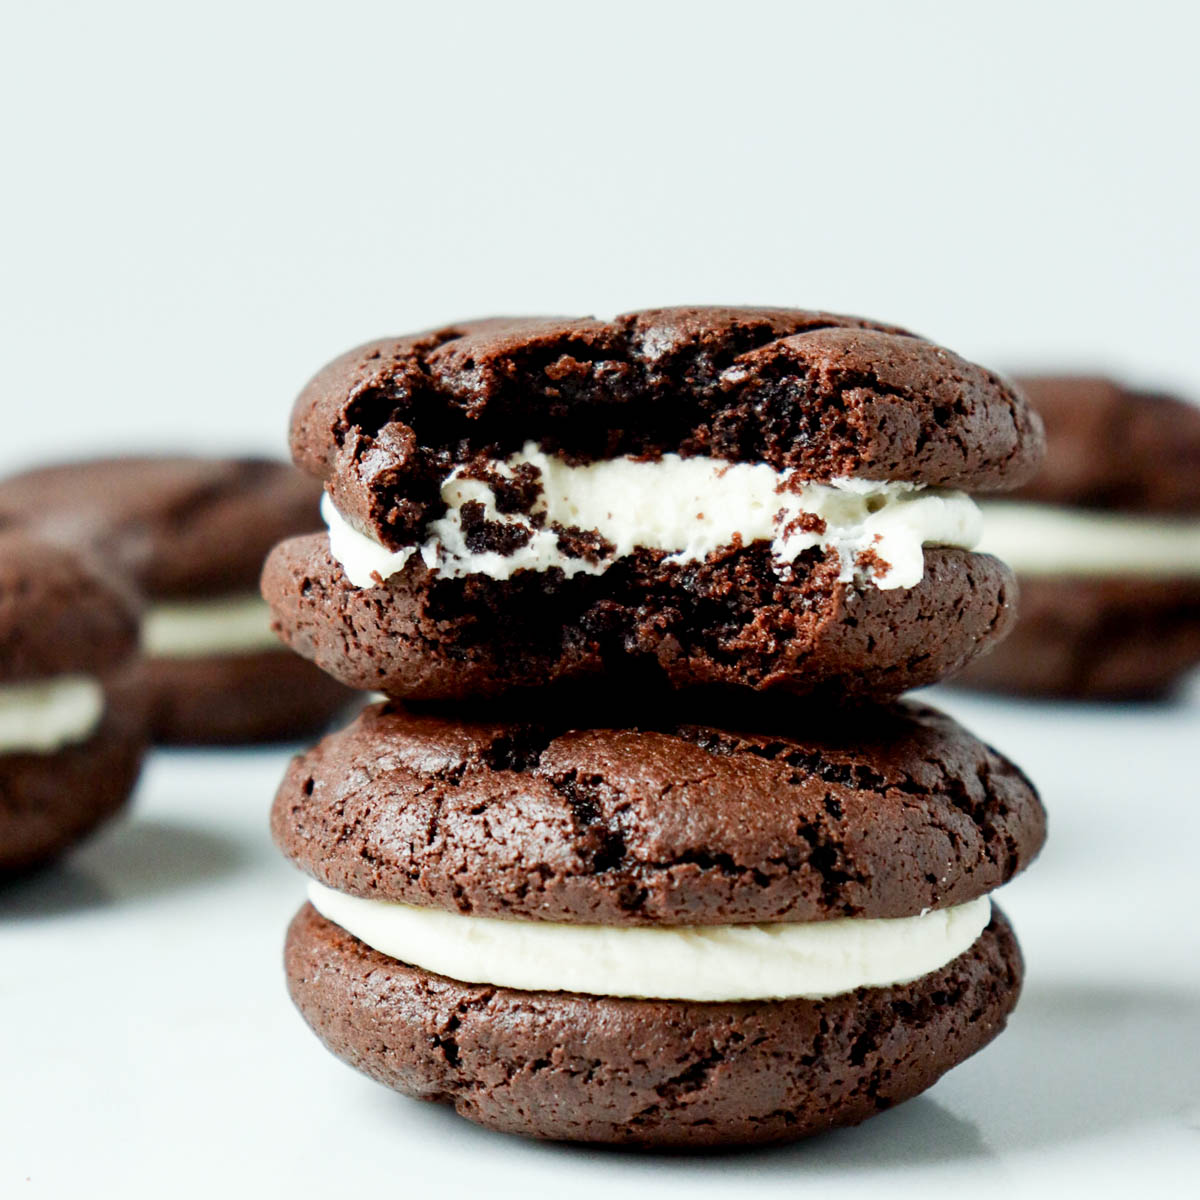 Stacked chocolate sandwich cookies with cream cheese frosting filling.